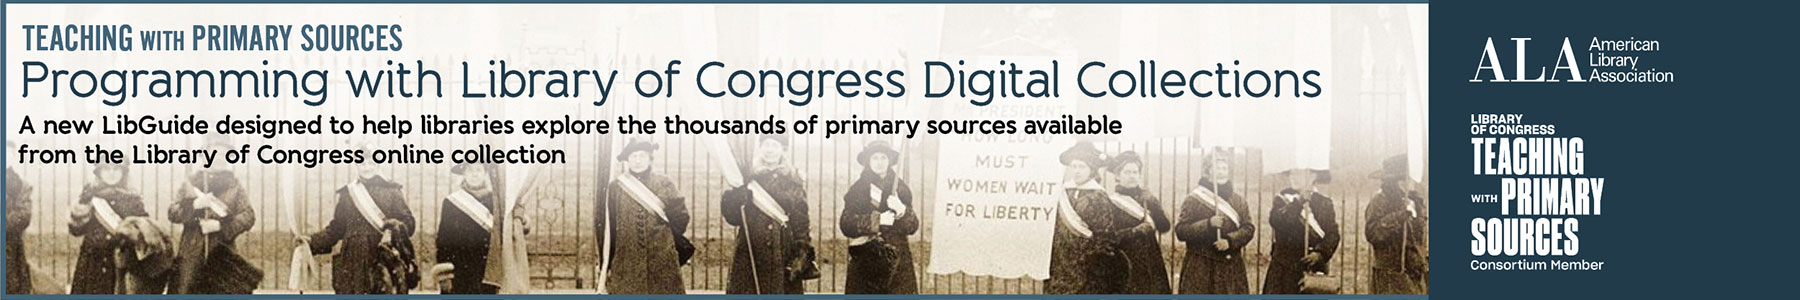 Teaching with Primary Sources: Programming with Library of Congress Digital Collections. A new LibGuide designed to help libraries explore the thousands of primary sources available from the Library of Congress online collection. Ad from the Public Library Association.